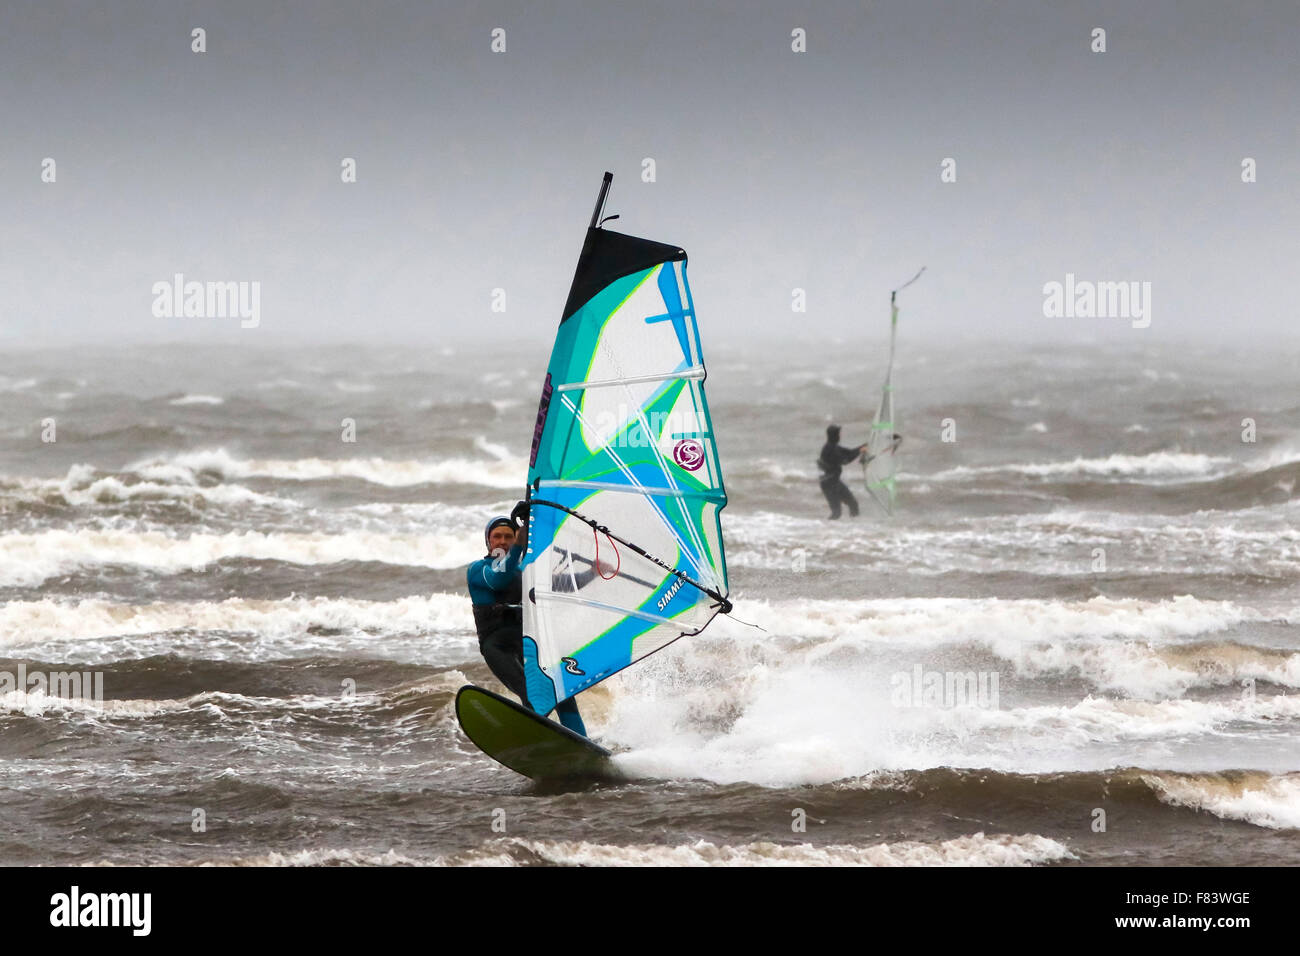 Troon, Ayrshire, UK. 05th Dec, 2015. As storm Desmond hammers the Ayrshire coast with high winds and heavy rain, not everyone is complaining about the weather.These windsurfers, off the beach at Troon, Ayrshire, are taking advantage of the weather conditions and high waves to enjoy their sport. Credit:  Findlay/Alamy Live News Stock Photo